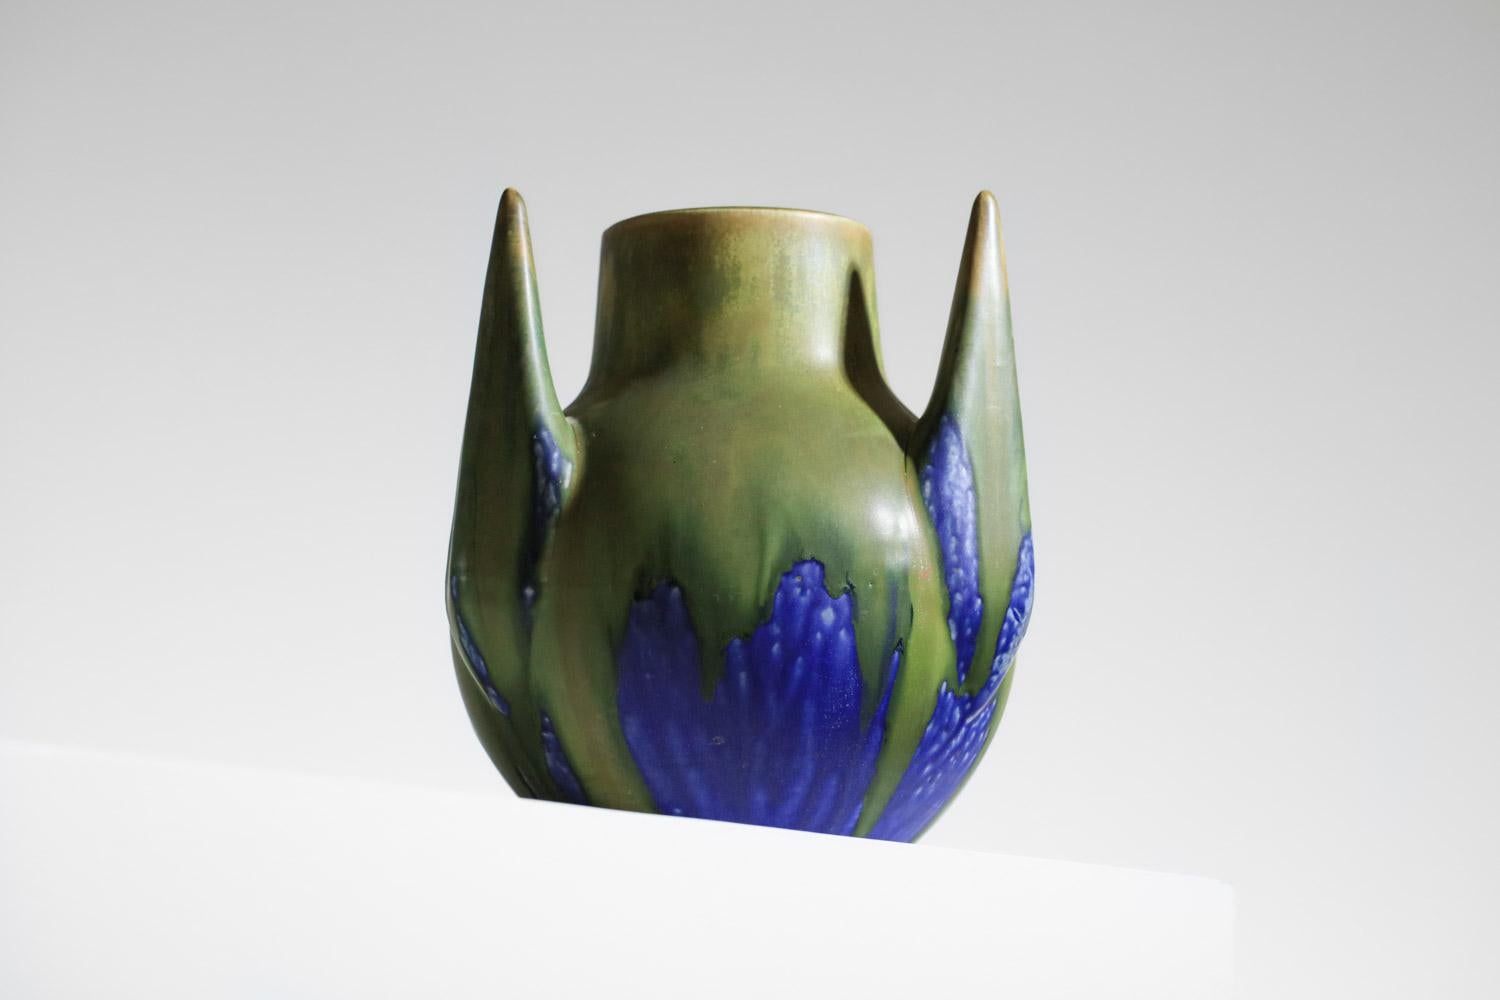 Ceramic vase from the 1920s by French artist Gilbert Méténier. Very original free form for this enameled vase in shades of blue and green. Very fine vintage condition, artist's signature on the underside of the vase (see photos).